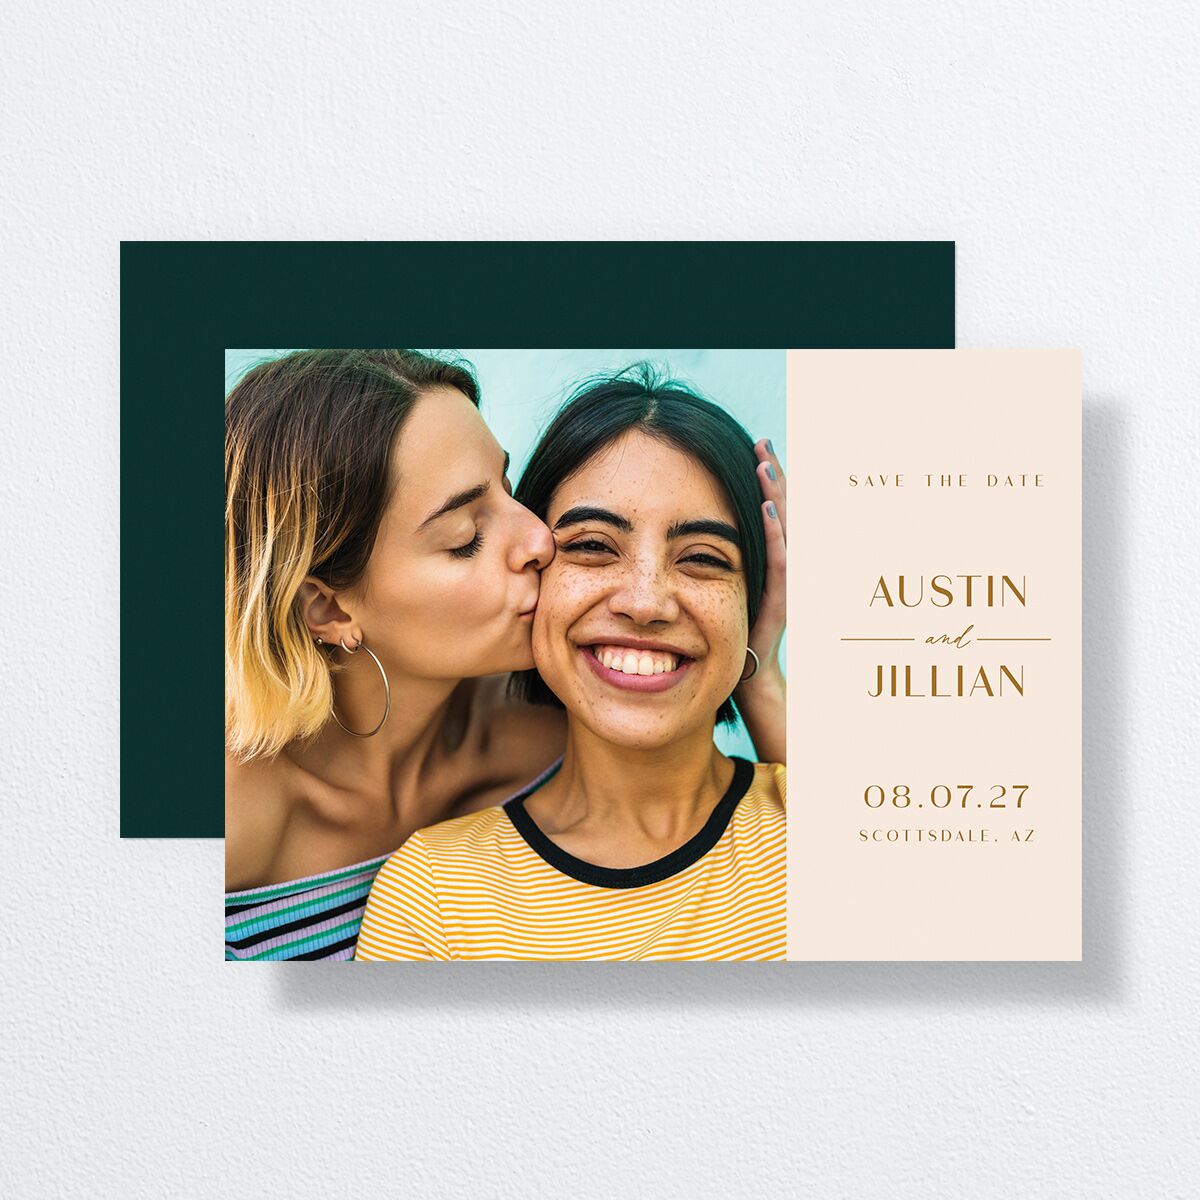 Modern Romantic Save The Date Cards front-and-back